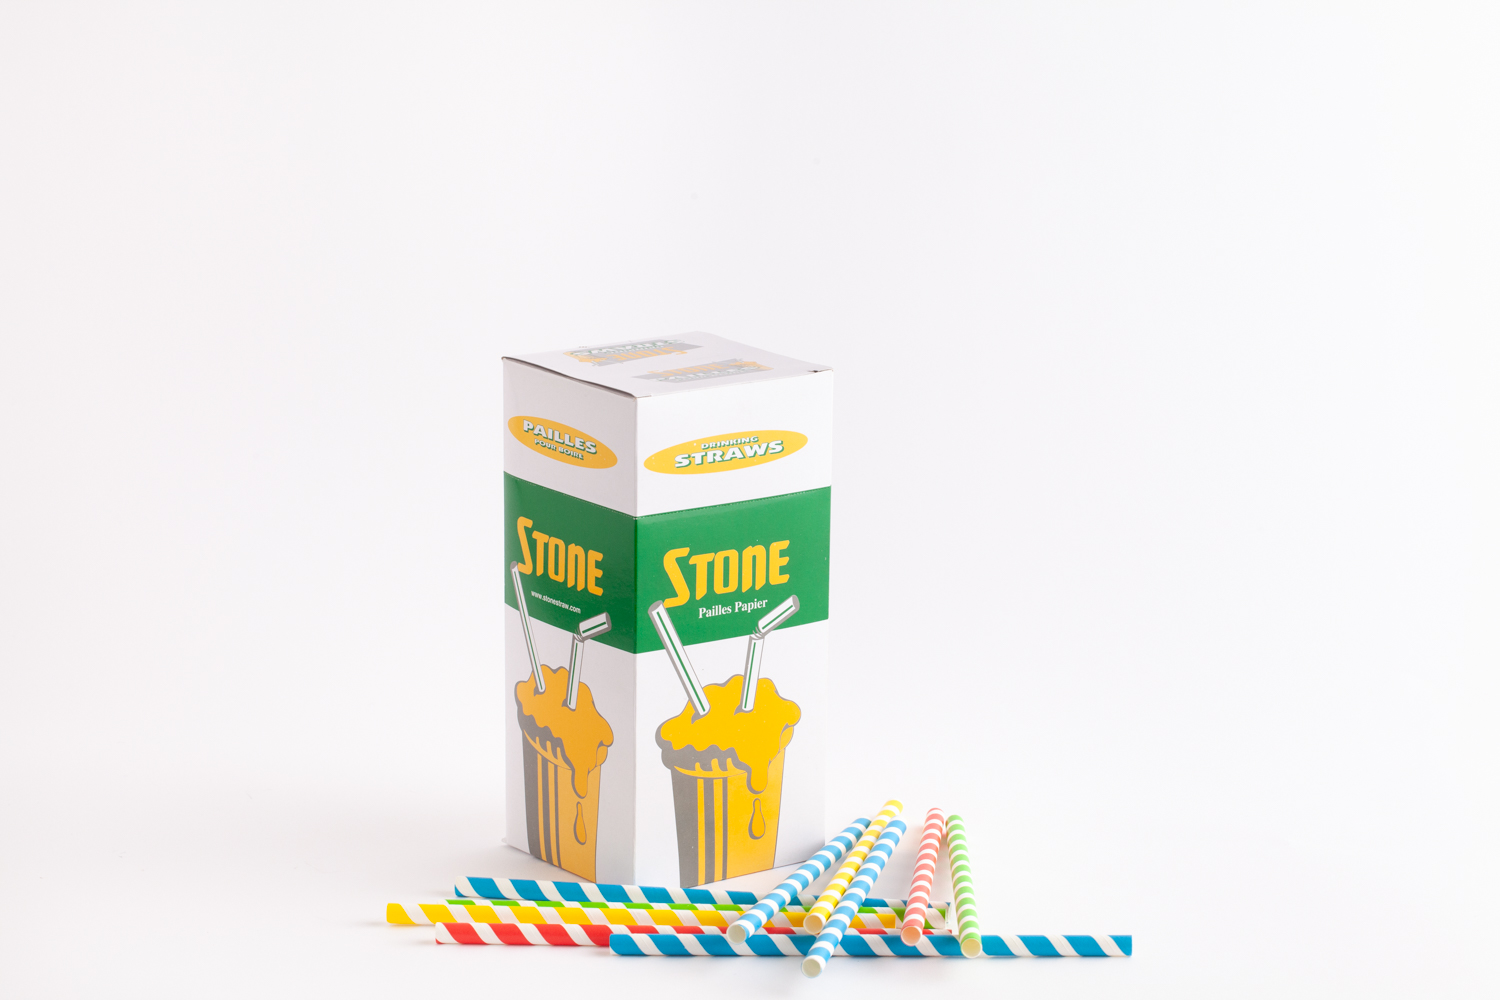 stone straw package standing upright with a variety of different coloured paper straw laying to the right of the package